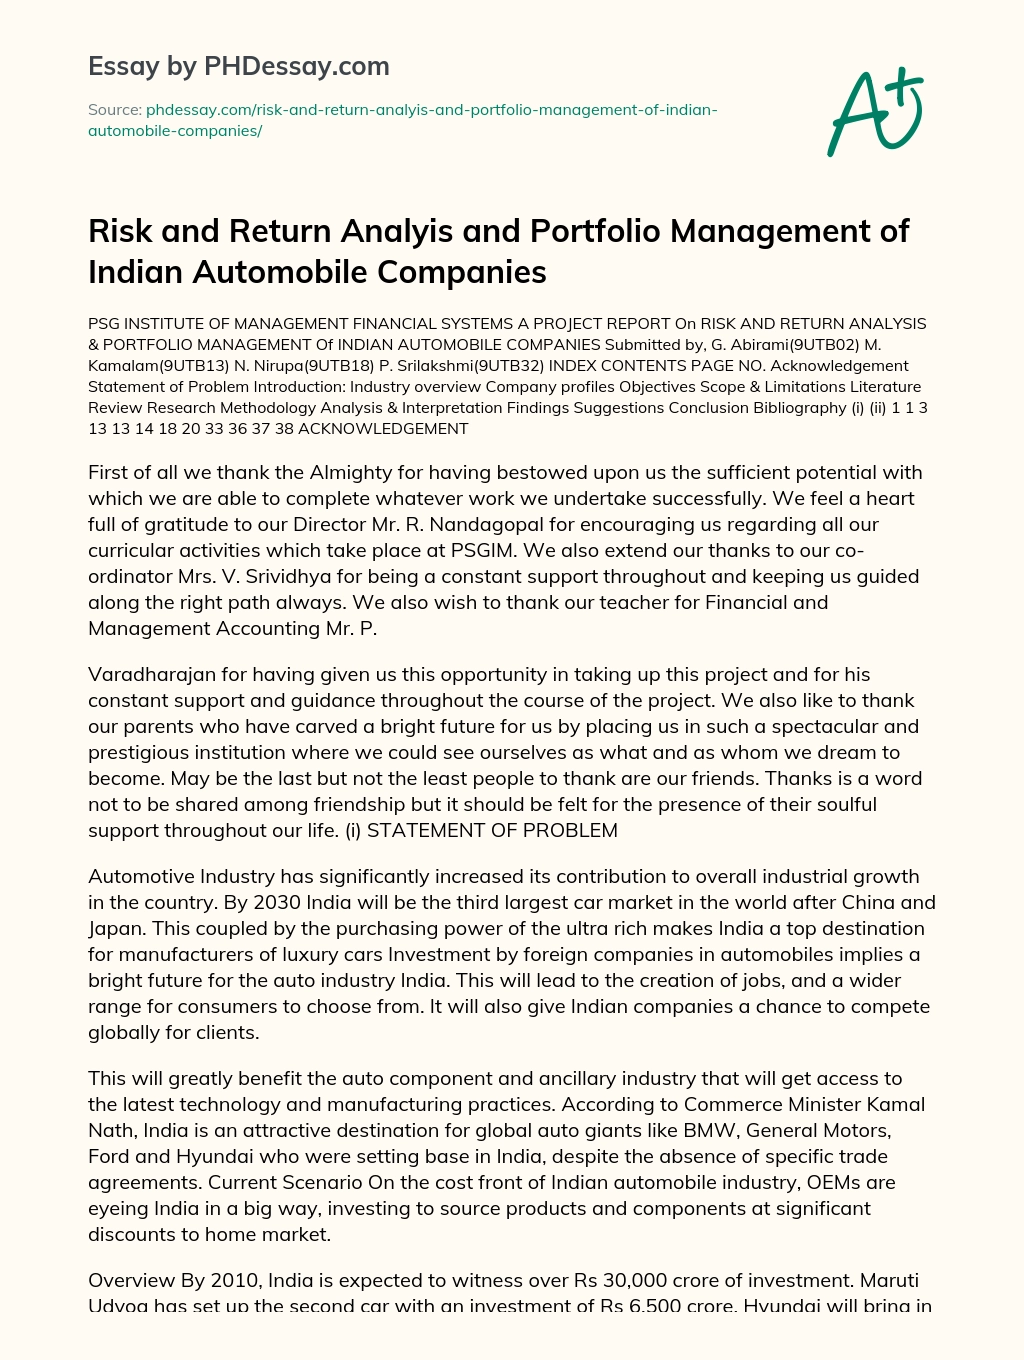 Risk and Return Analyis and Portfolio Management of Indian Automobile Companies essay